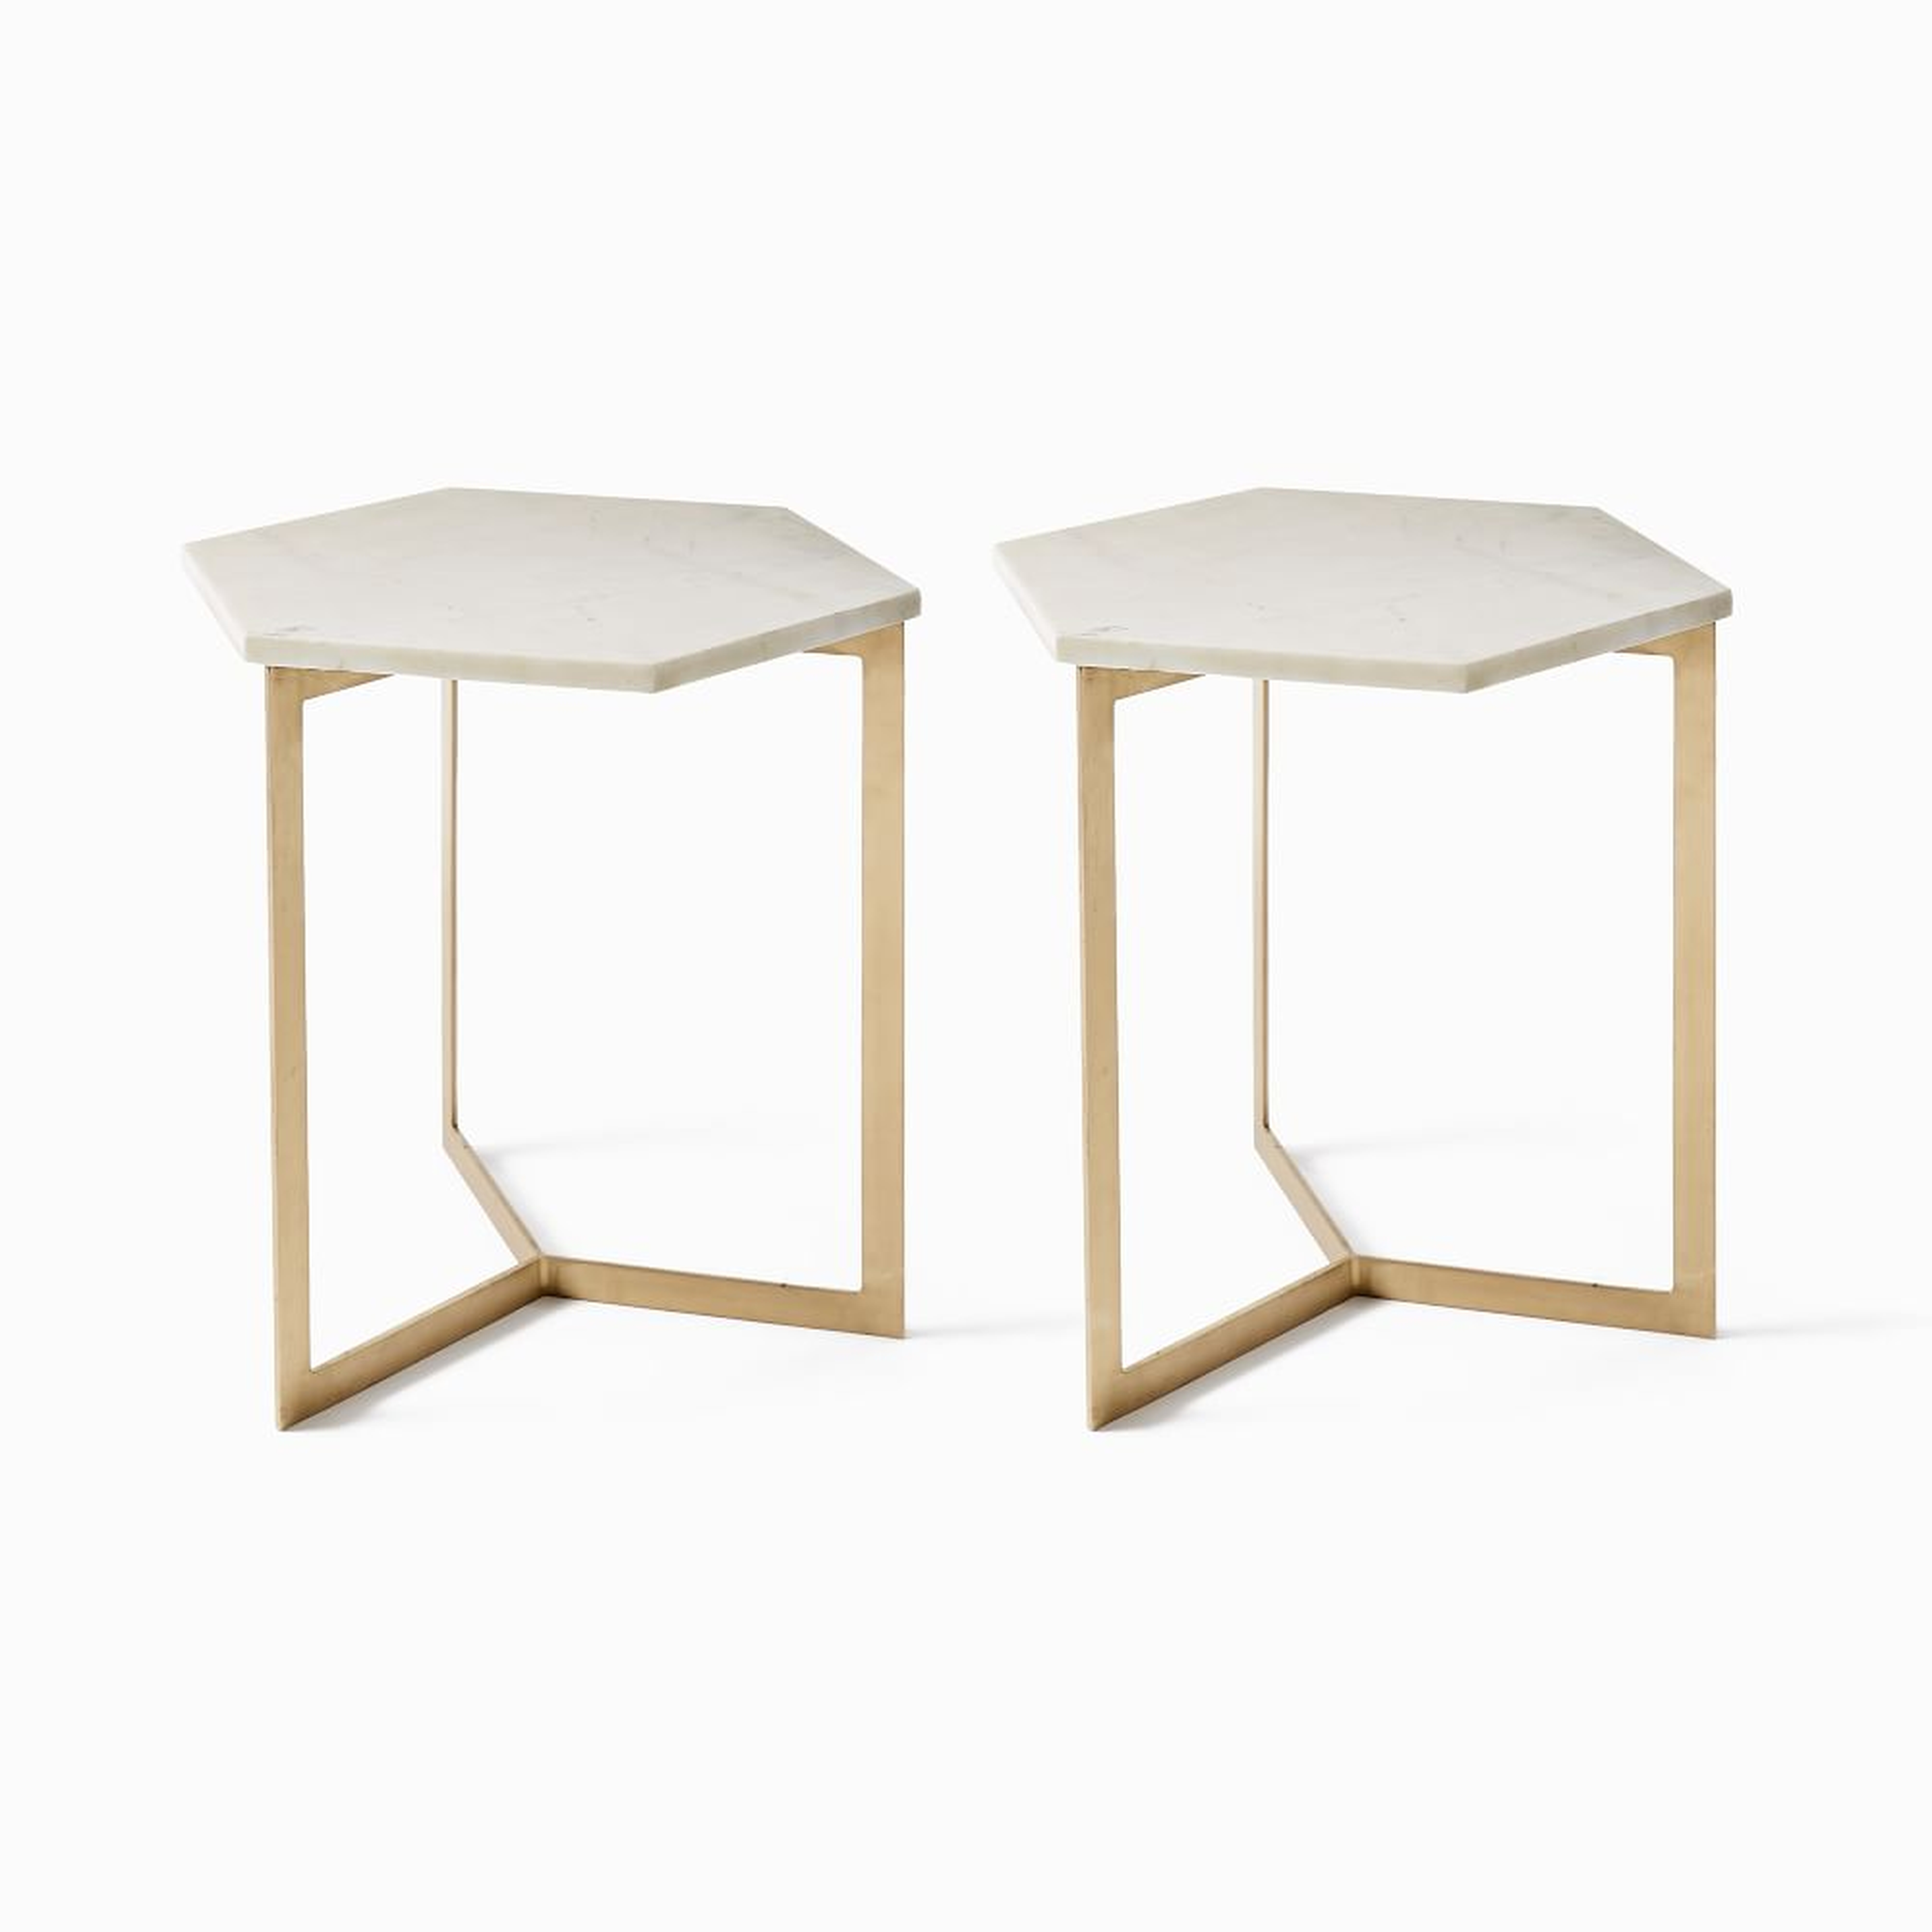 Hex Side Table, White Marble/Antique Brass, Set of 2 - West Elm